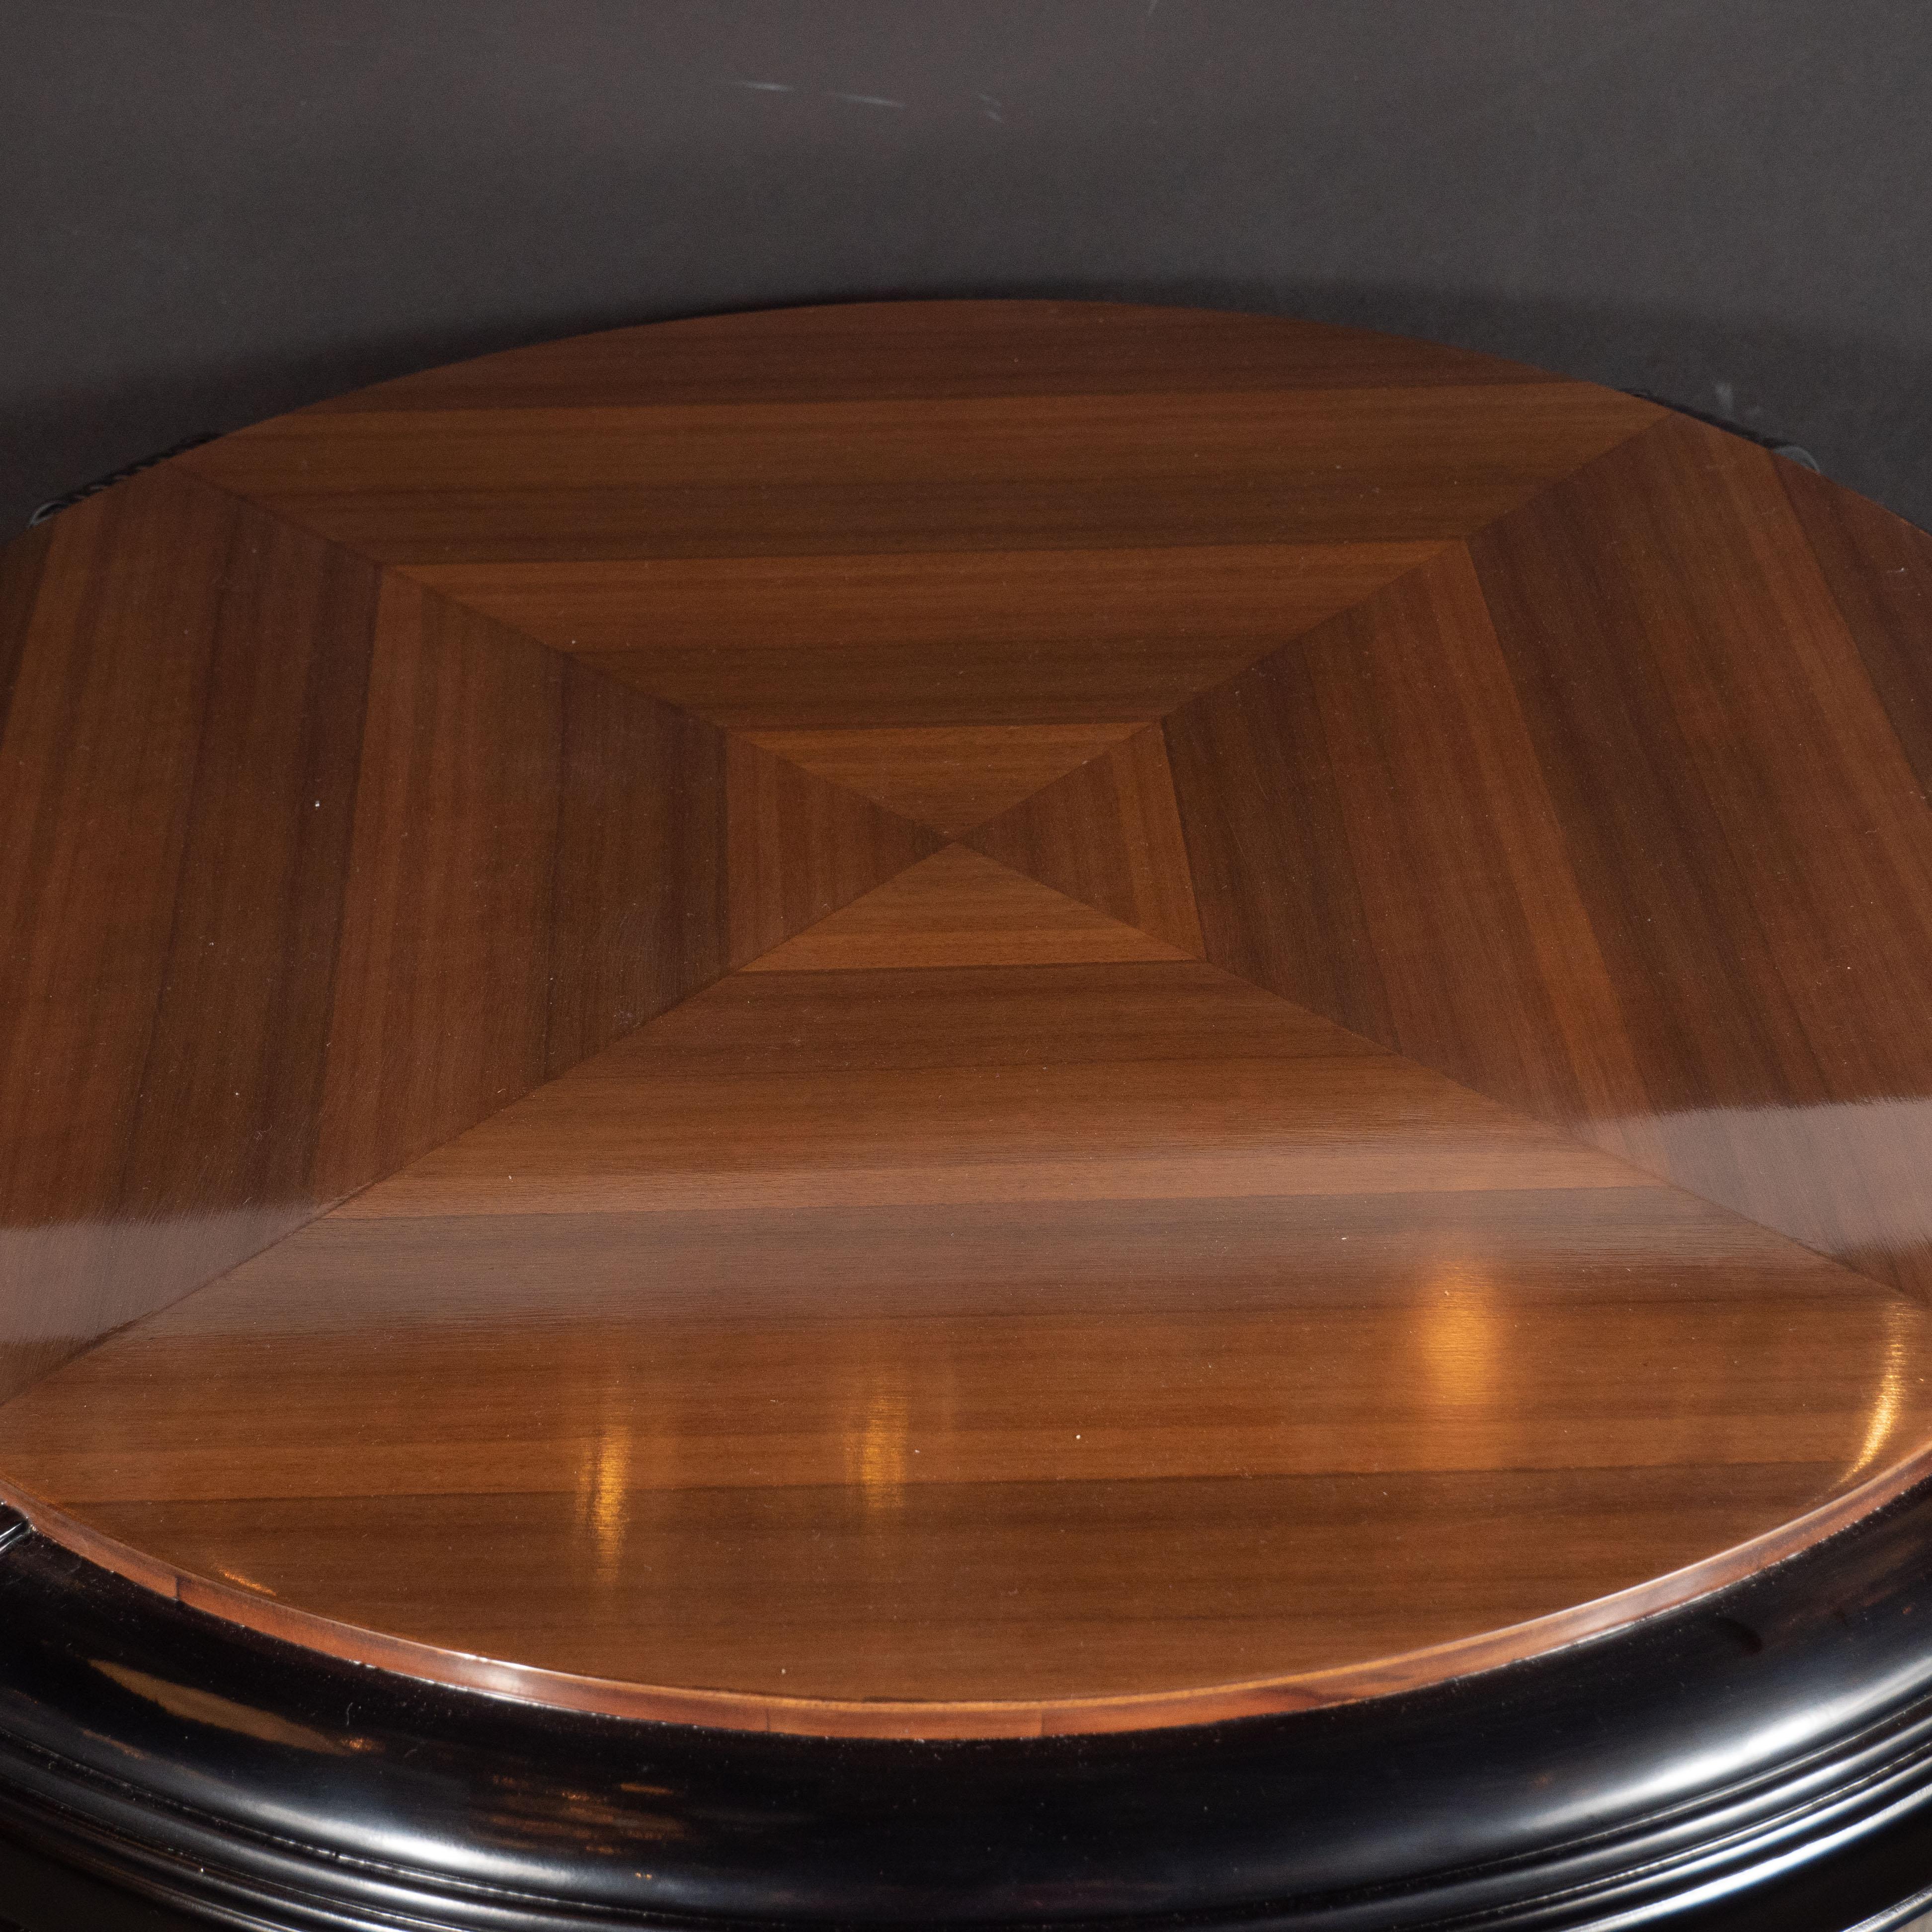 This stunning Machine Age streamlined Art Deco table was realized in the United States, circa 1935. It features a walnut top whose grain has been bookmatched to create a series of concentric rhomboid forms. Encircling the top is a reeded apron in